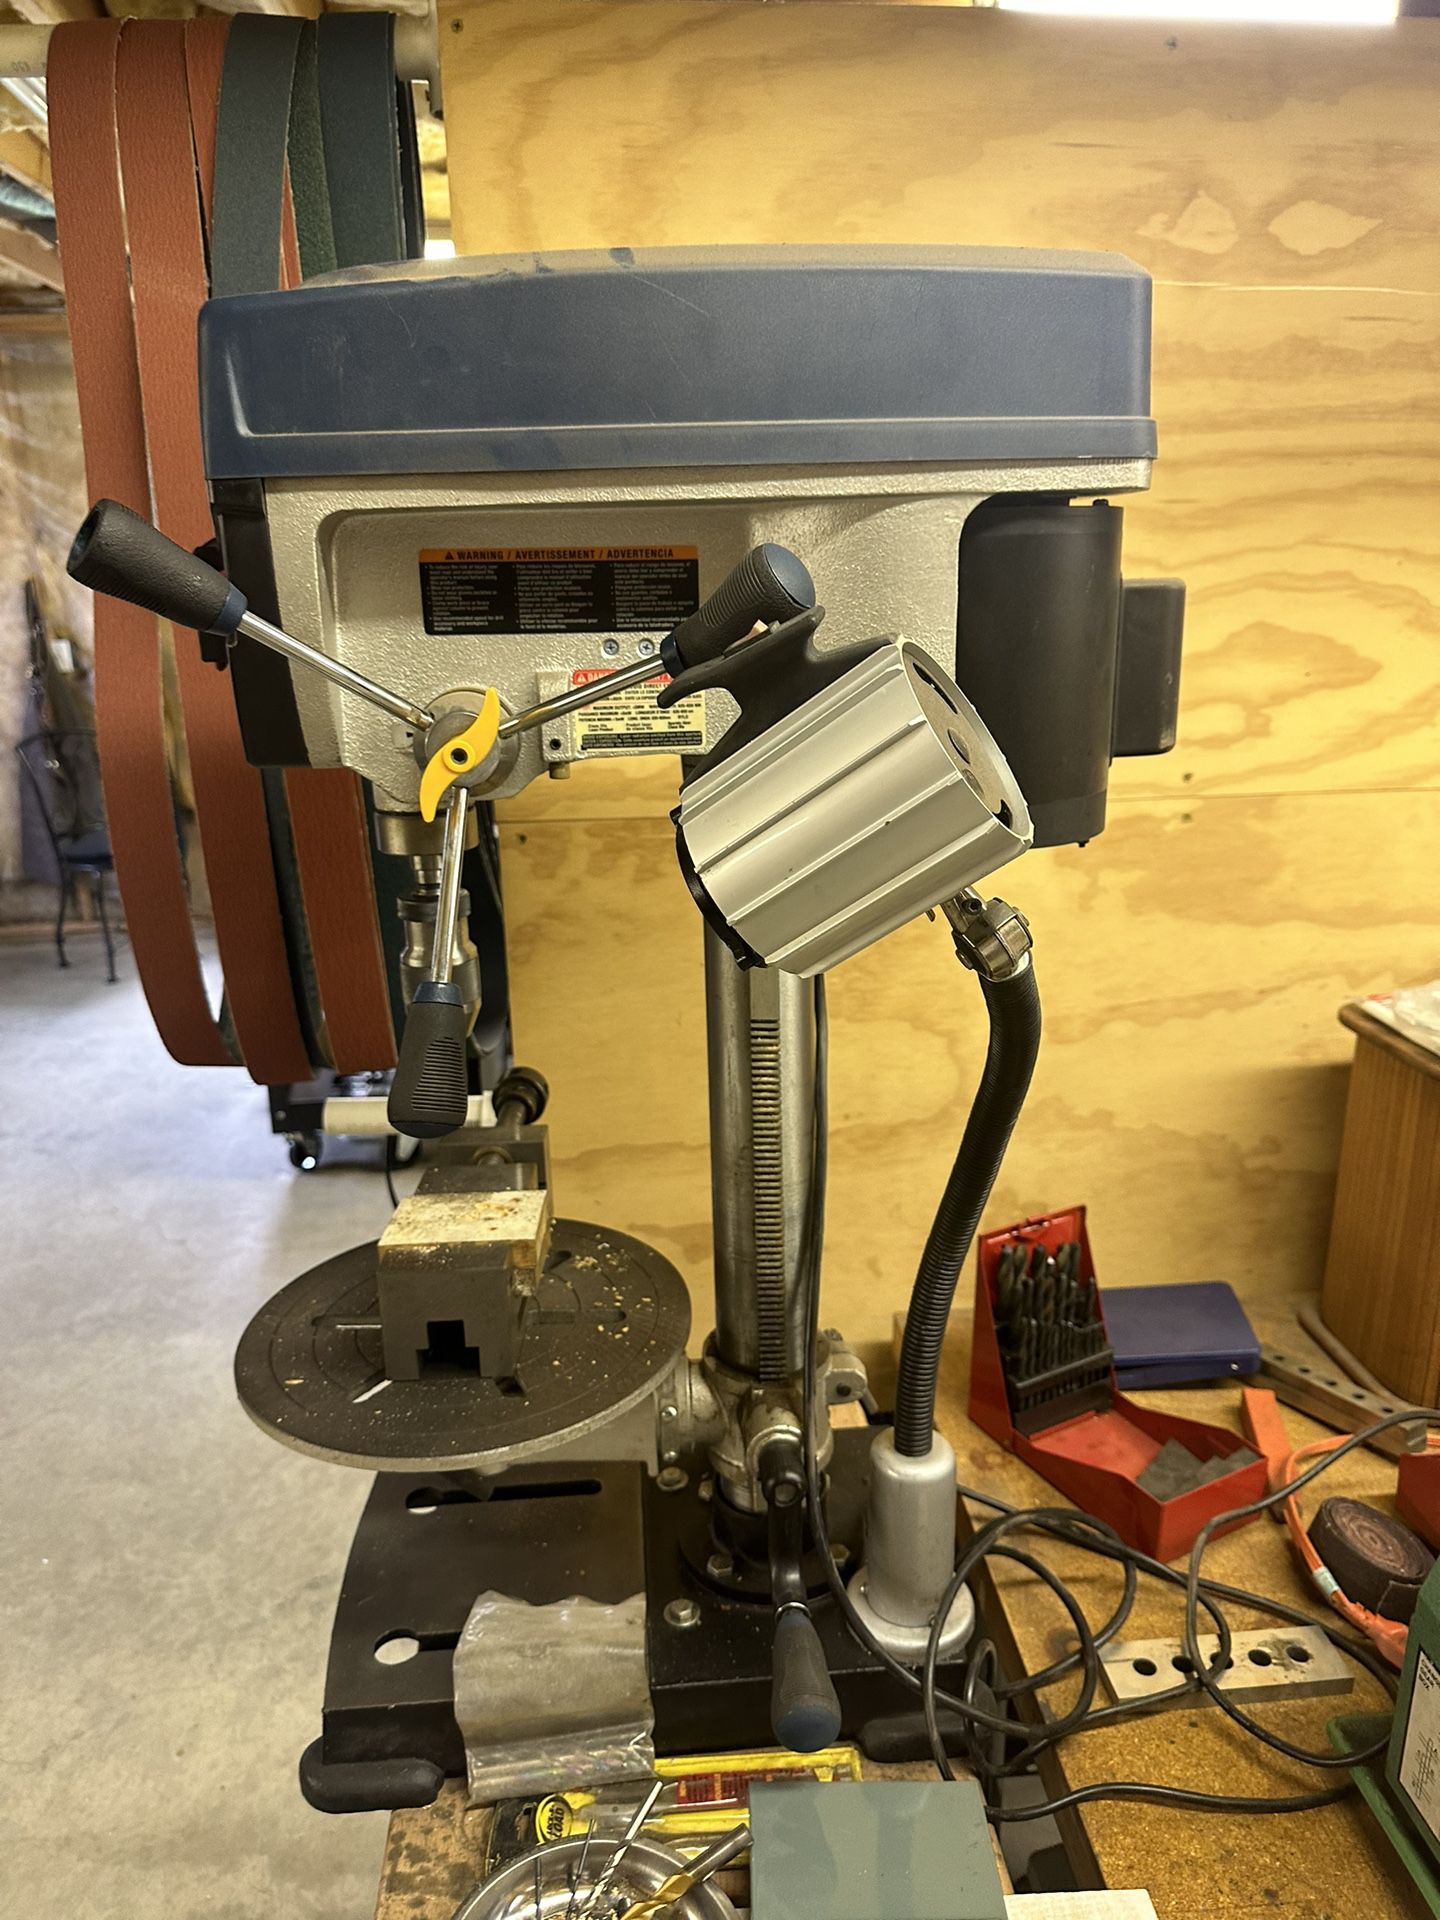 Ryobi Bench drill DP 121l press with Laser and accessories